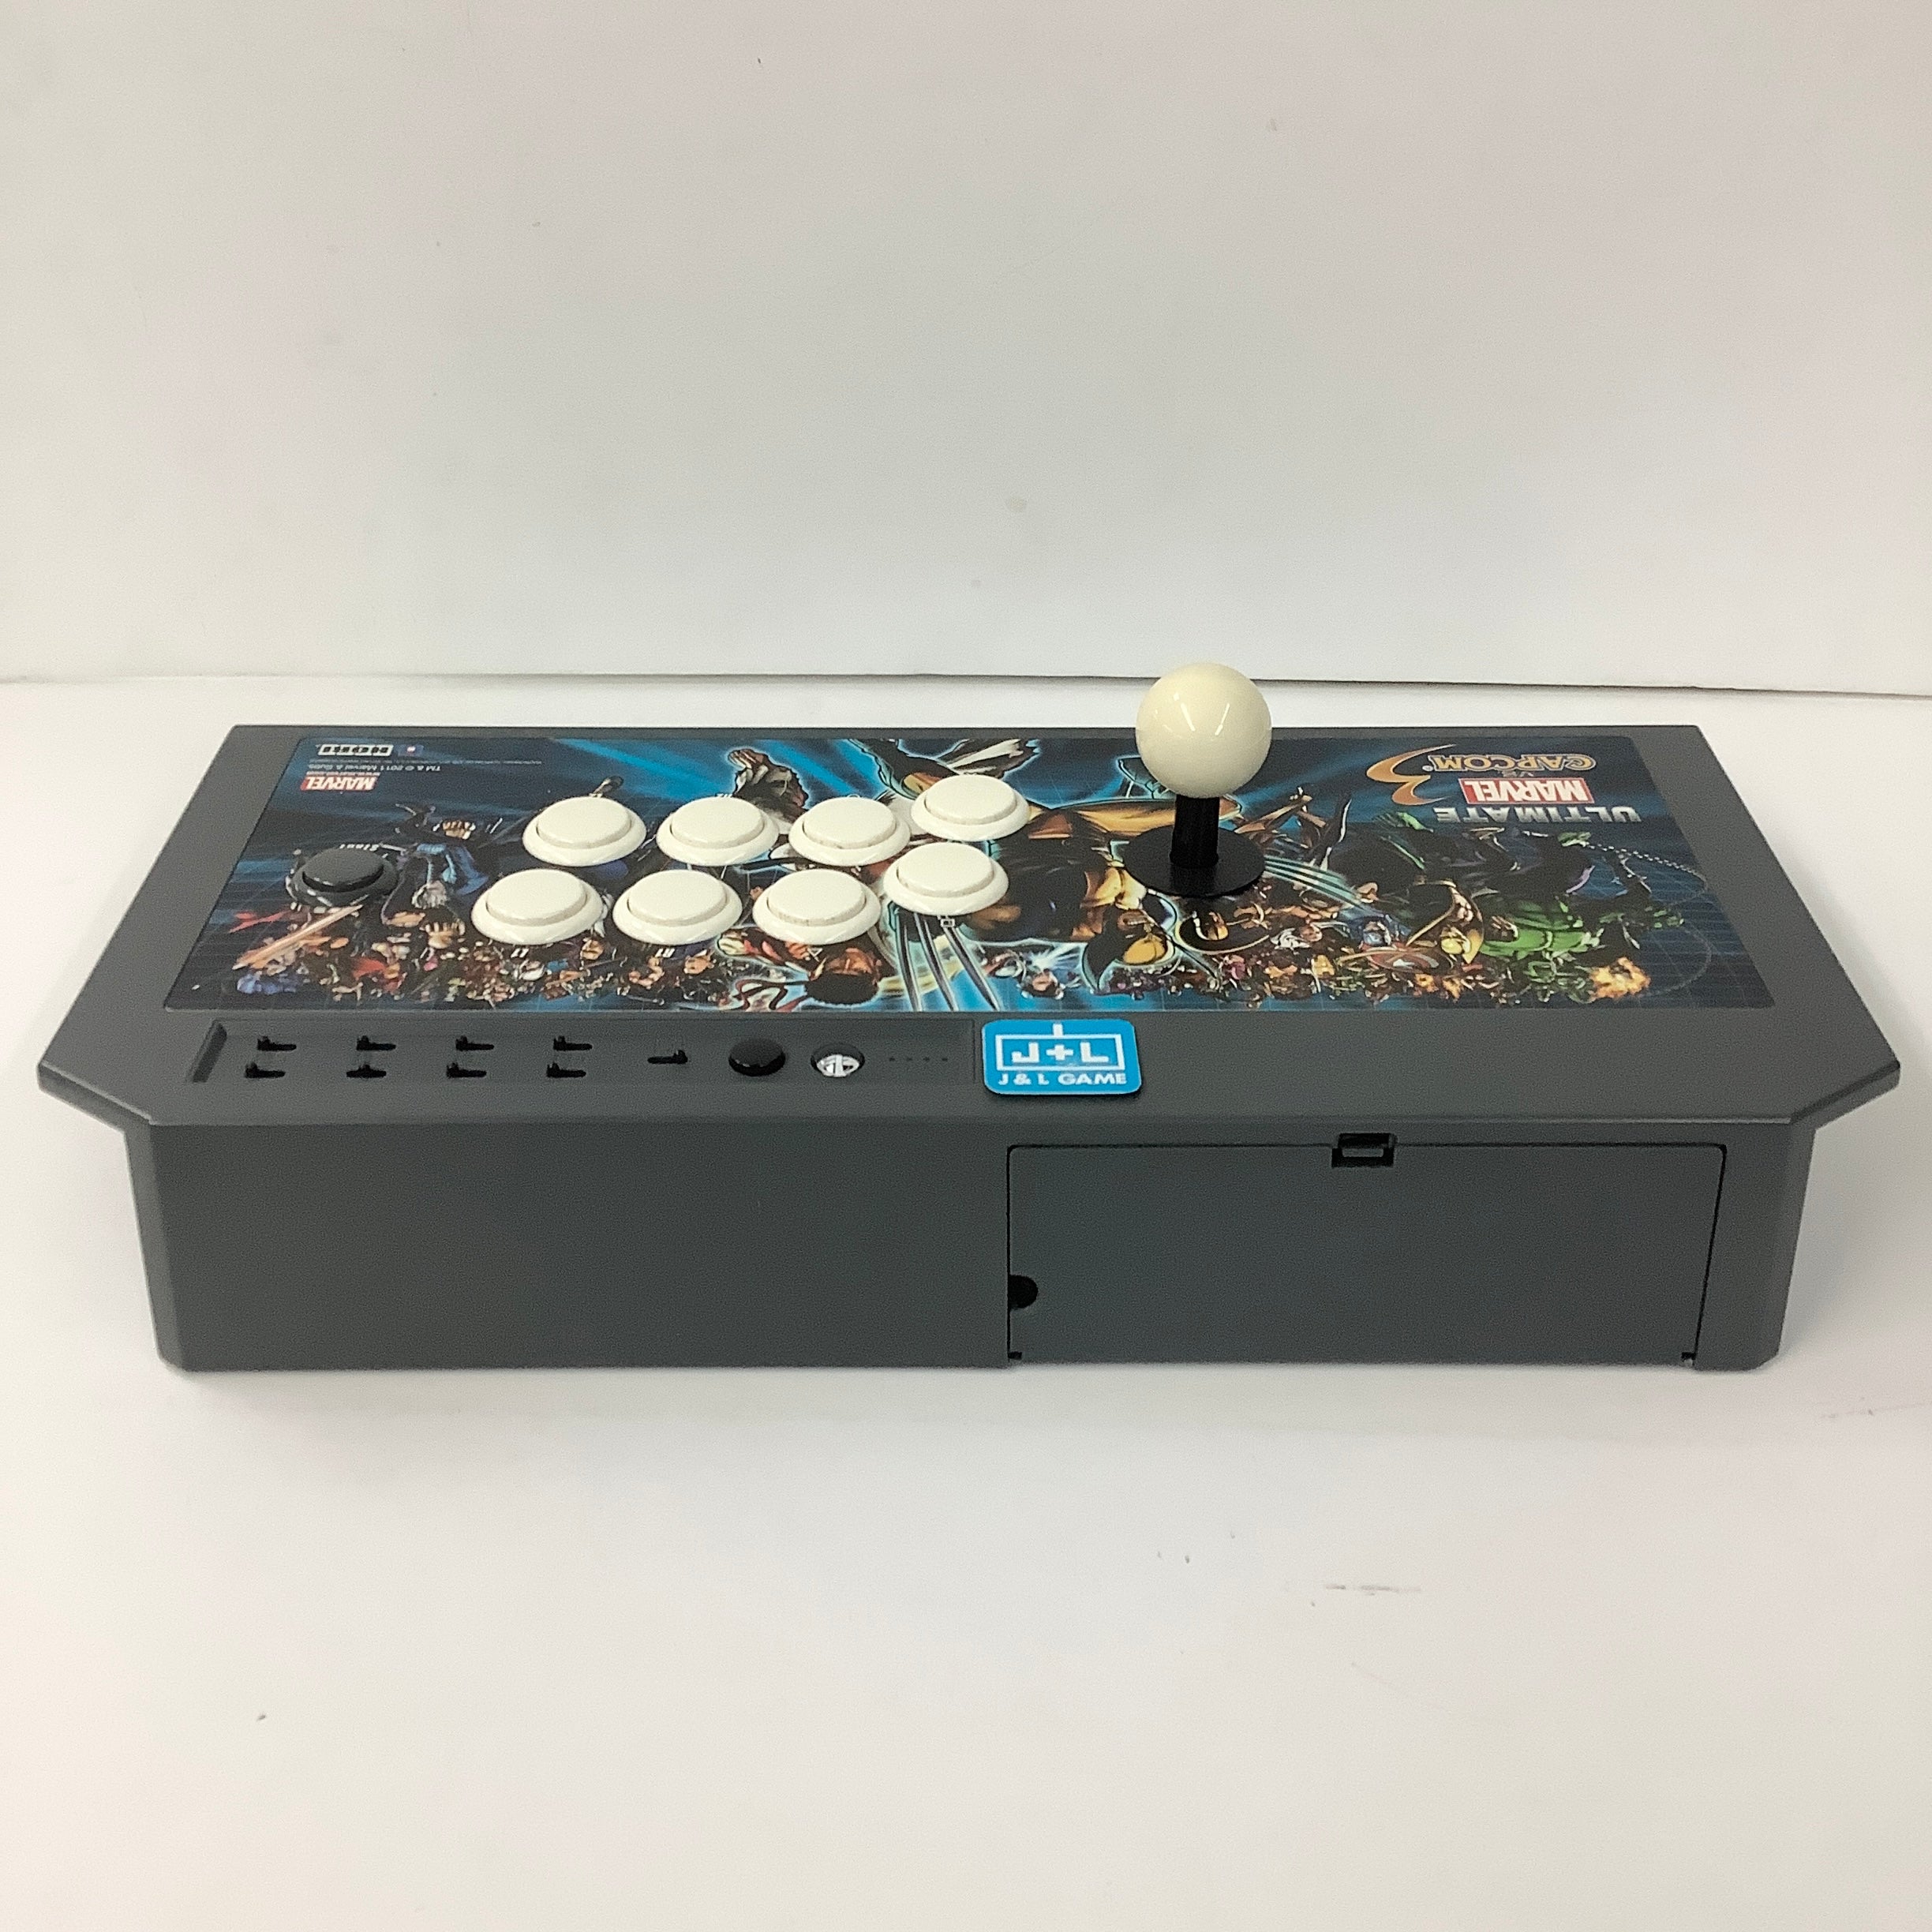 Ultimate Marvel vs Capcom 3 Arcade Stick - (PS3) PlayStation 3 [Pre-Owned] Accessories HORI   